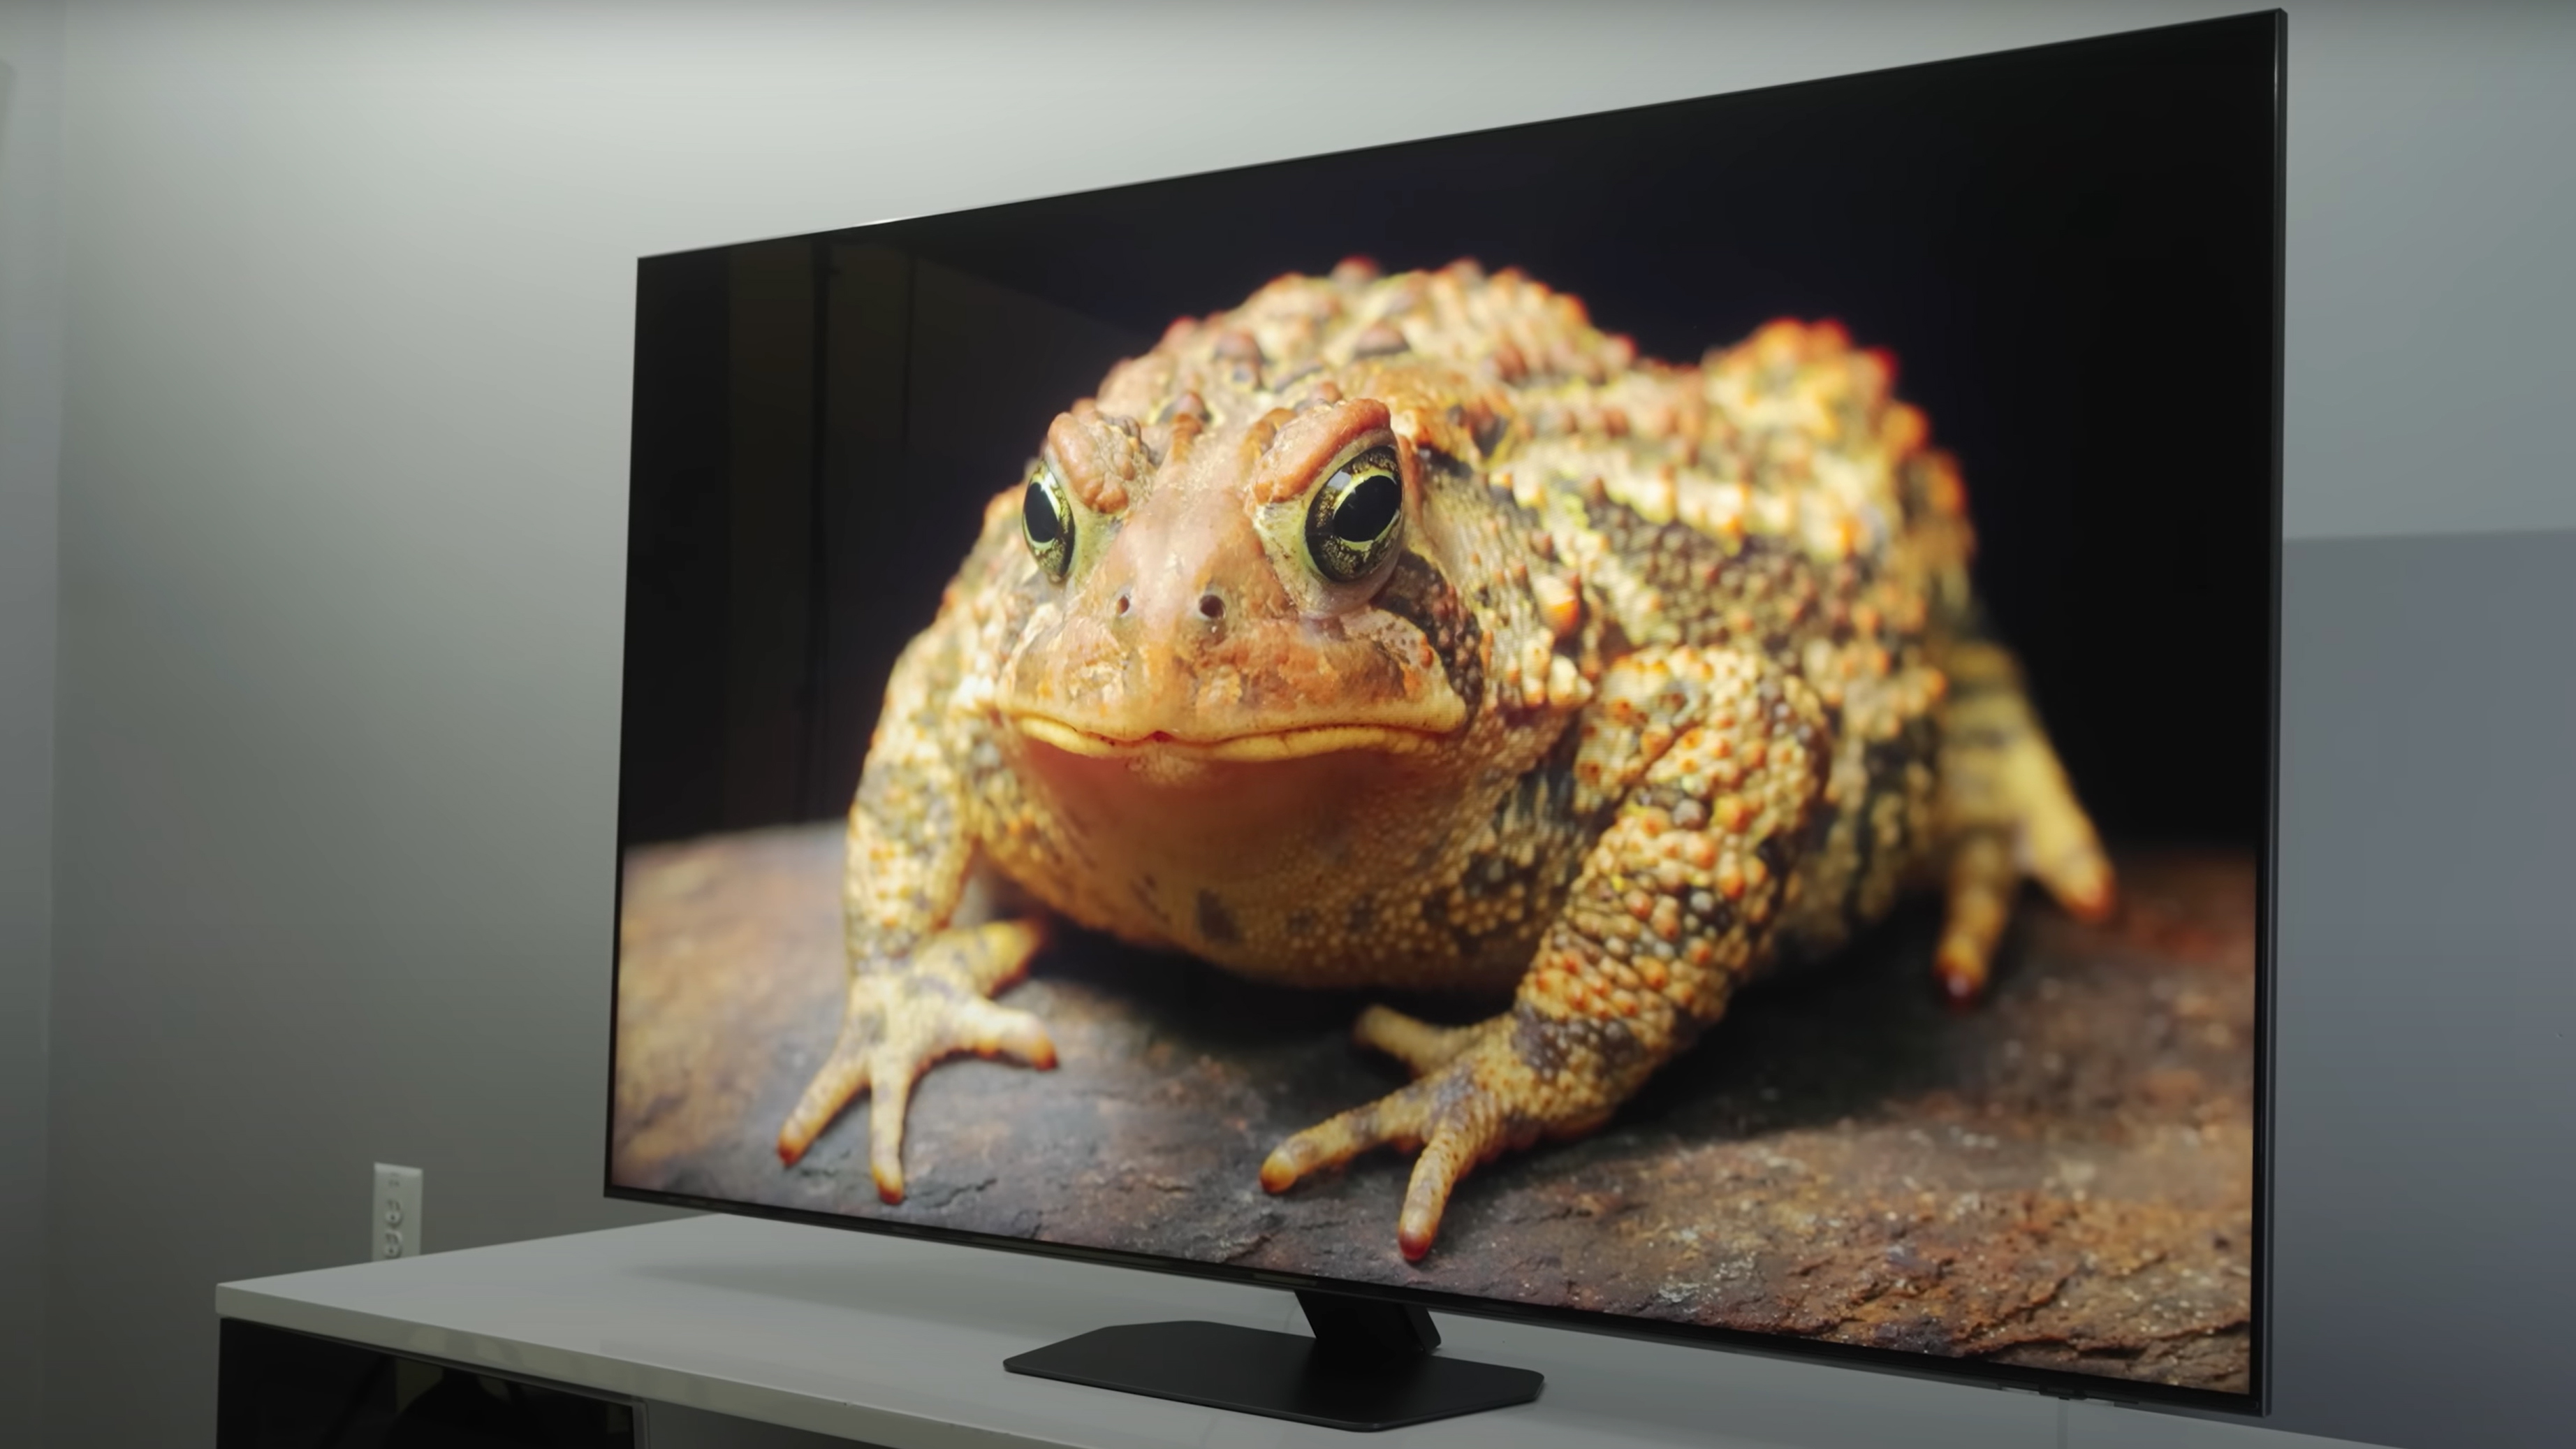 A stately fat toad shown in closeup on a Samsung QN90D TV.